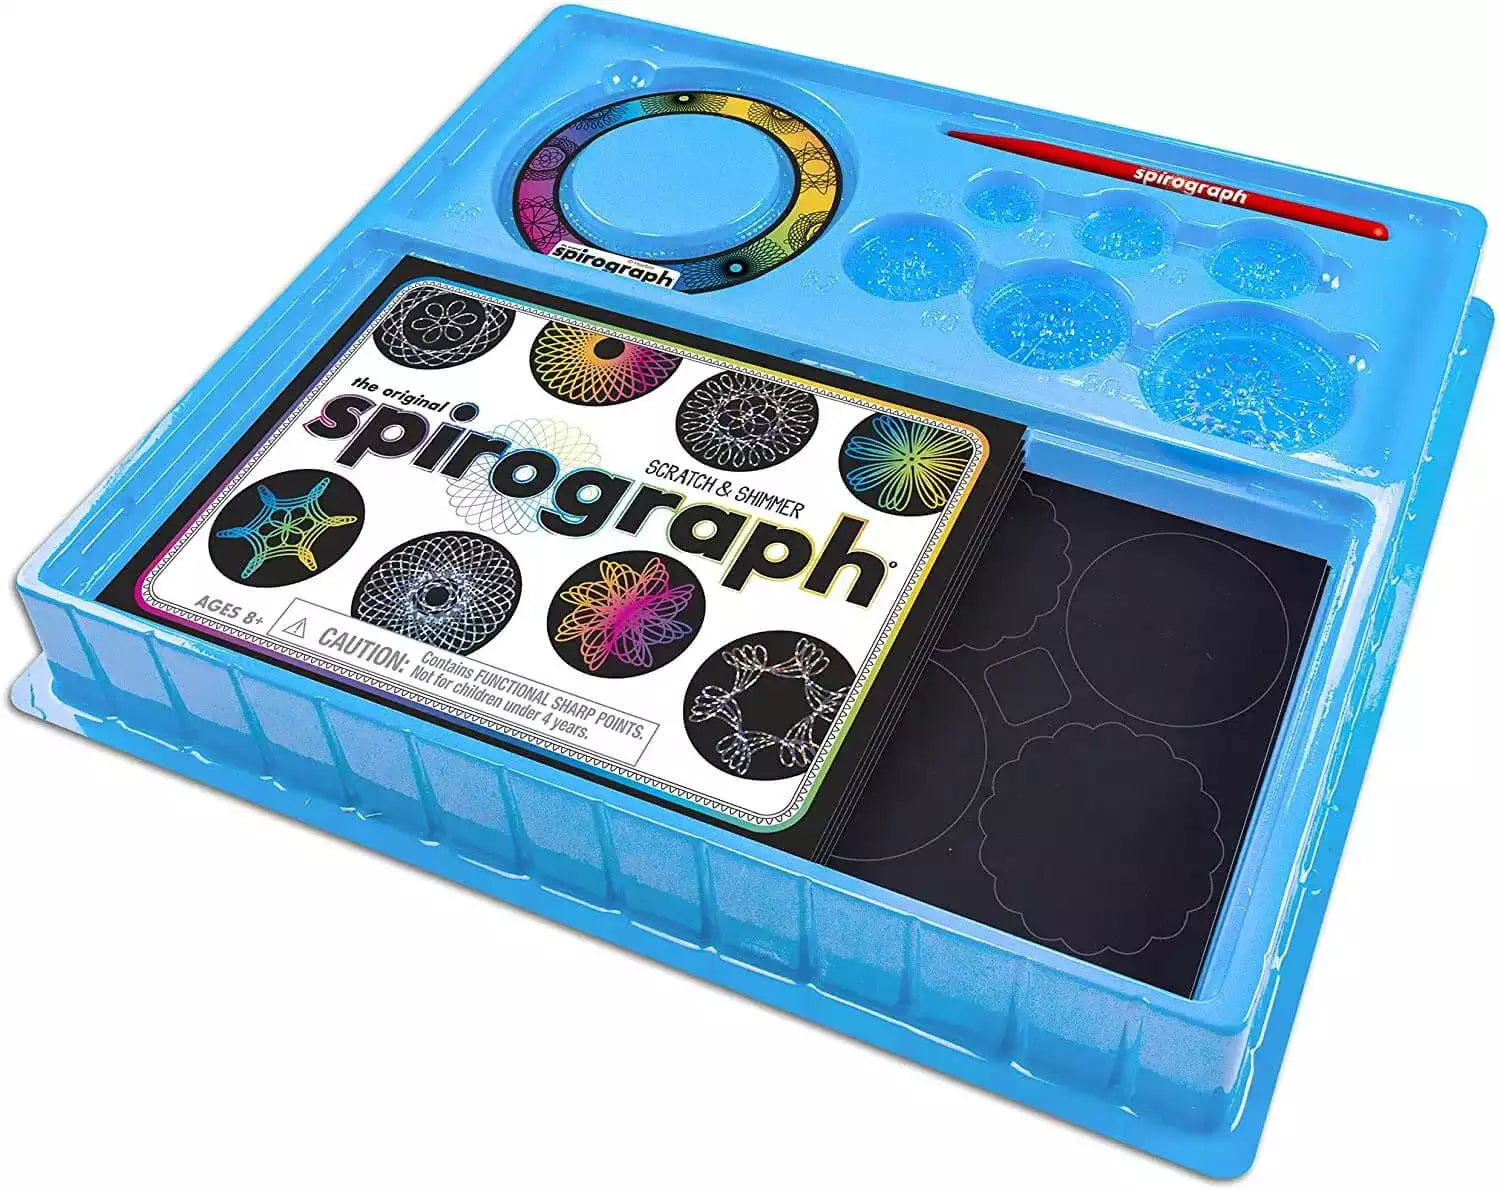 Activity kit for kids -Scratch and Shimmer - Spirograph